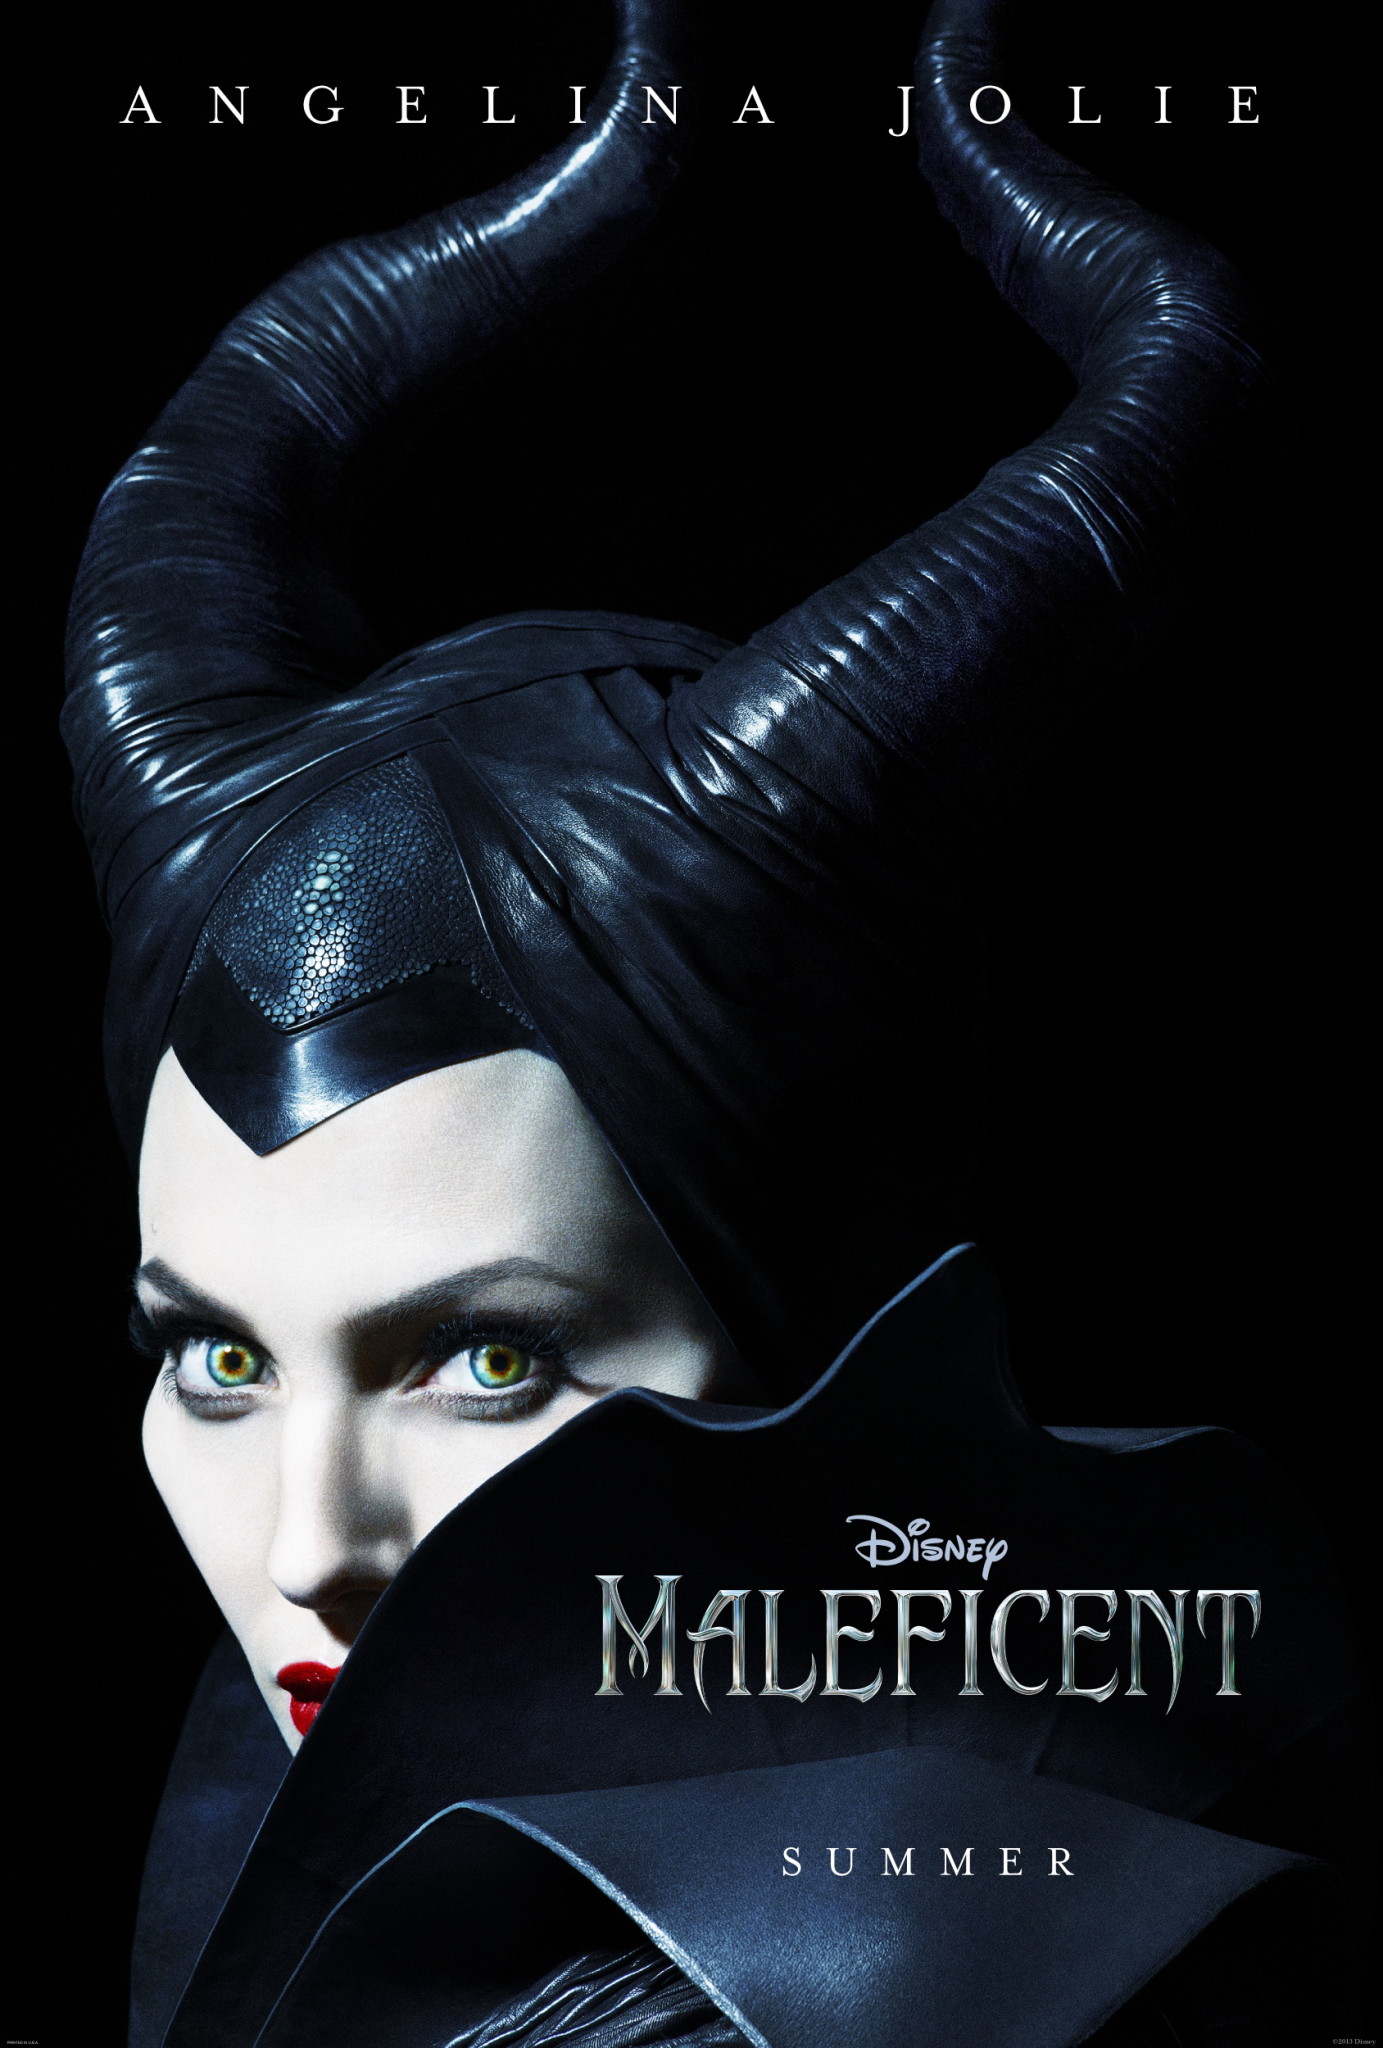 Just Released – New Poster for Maleficent